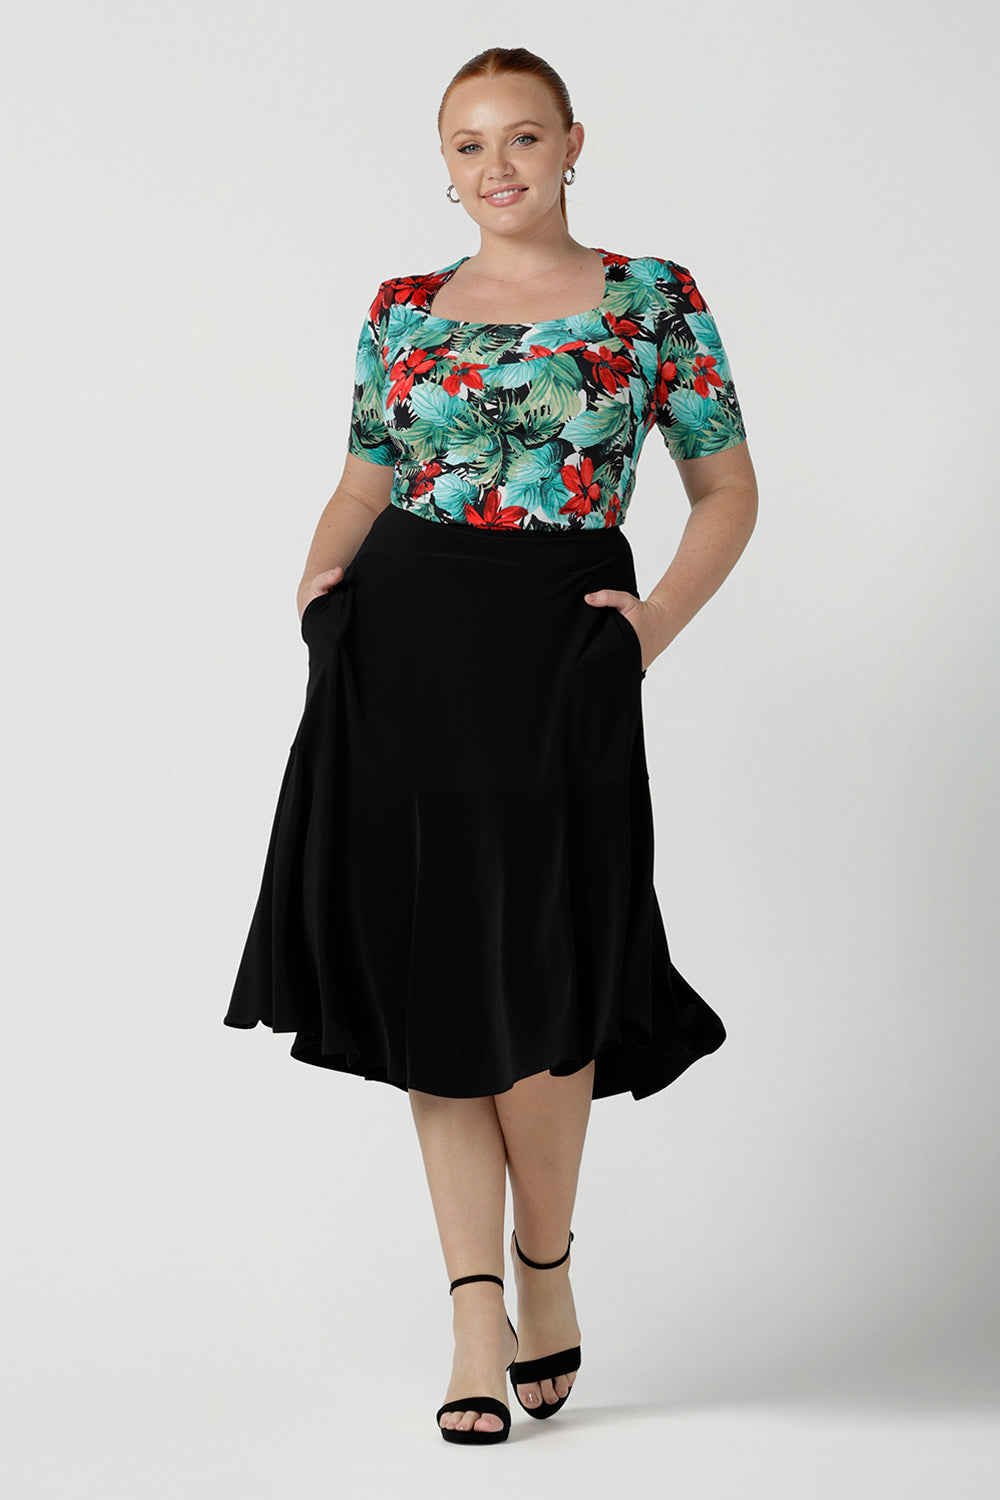 Size 12 curvy woman wears the Berni Top in Havana print. Square neckline with neck band and sleeve head tuck. Beautiful tropical print with red flowers and green palm leaves. Made in Australia for women size 8 - 24.